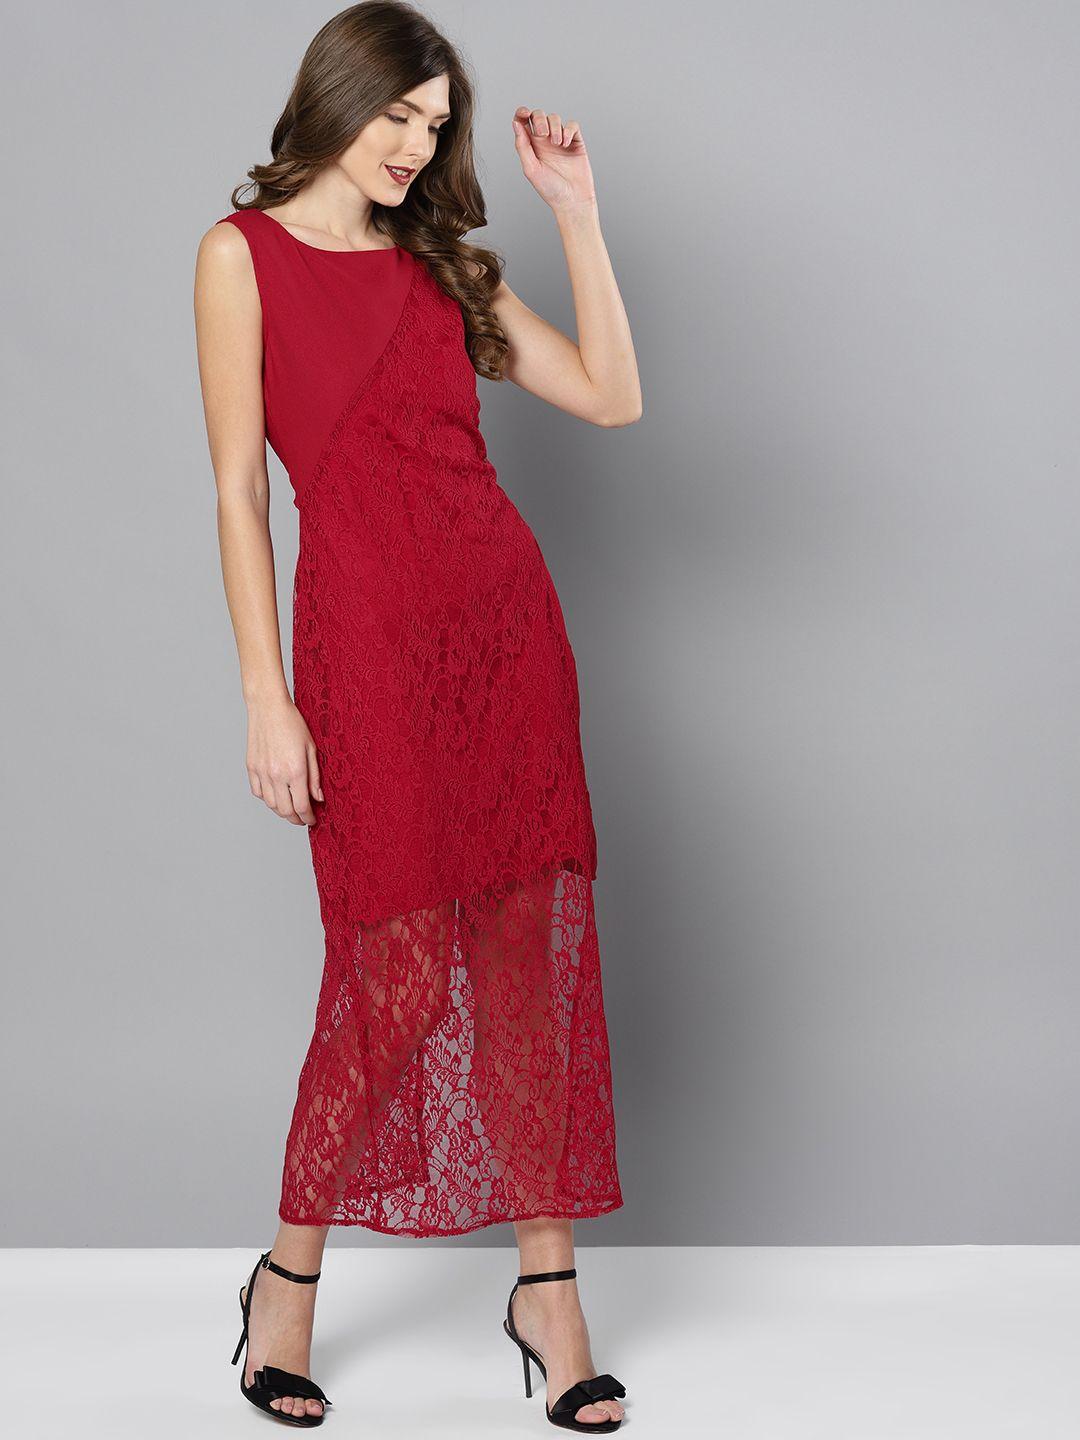 marie claire women red lace maxi dress